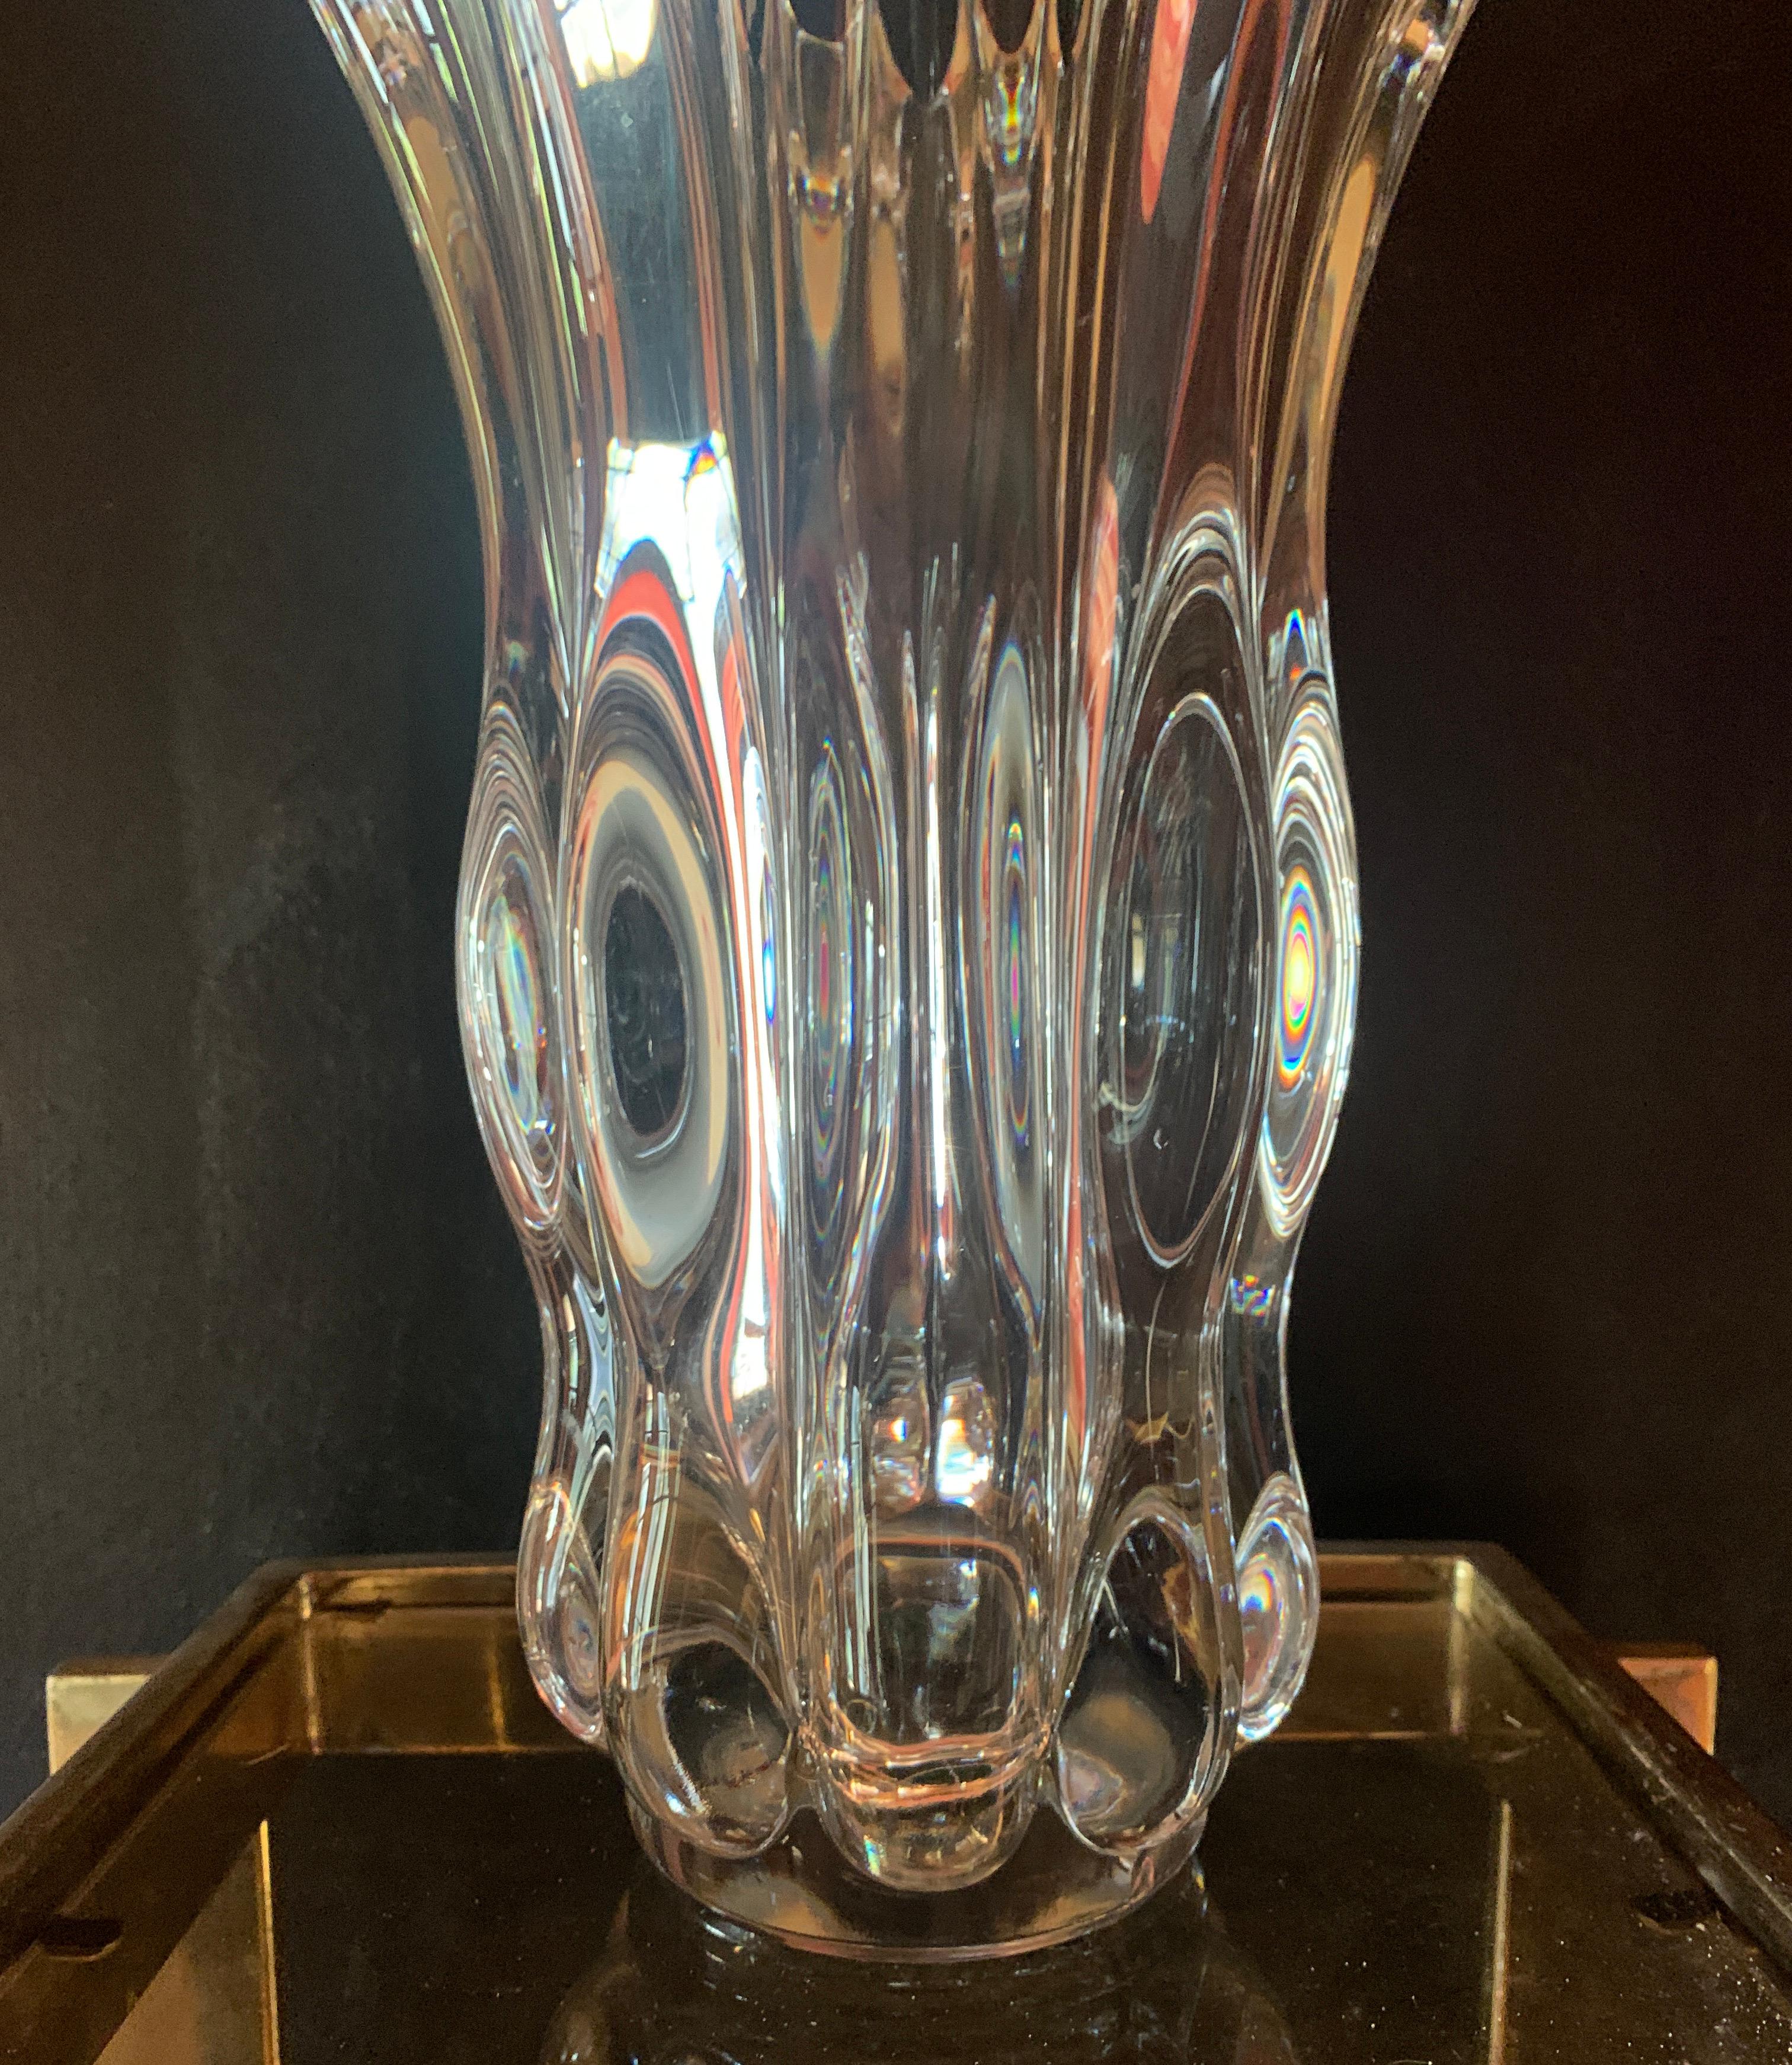 A stunning crystal vase - 'Made in France', and a compliment any room on a center table, dining table or mantle... The look of water splashing in motion is represented here in great detail. The piece weighs a bit over 15 pounds and will hold a spray